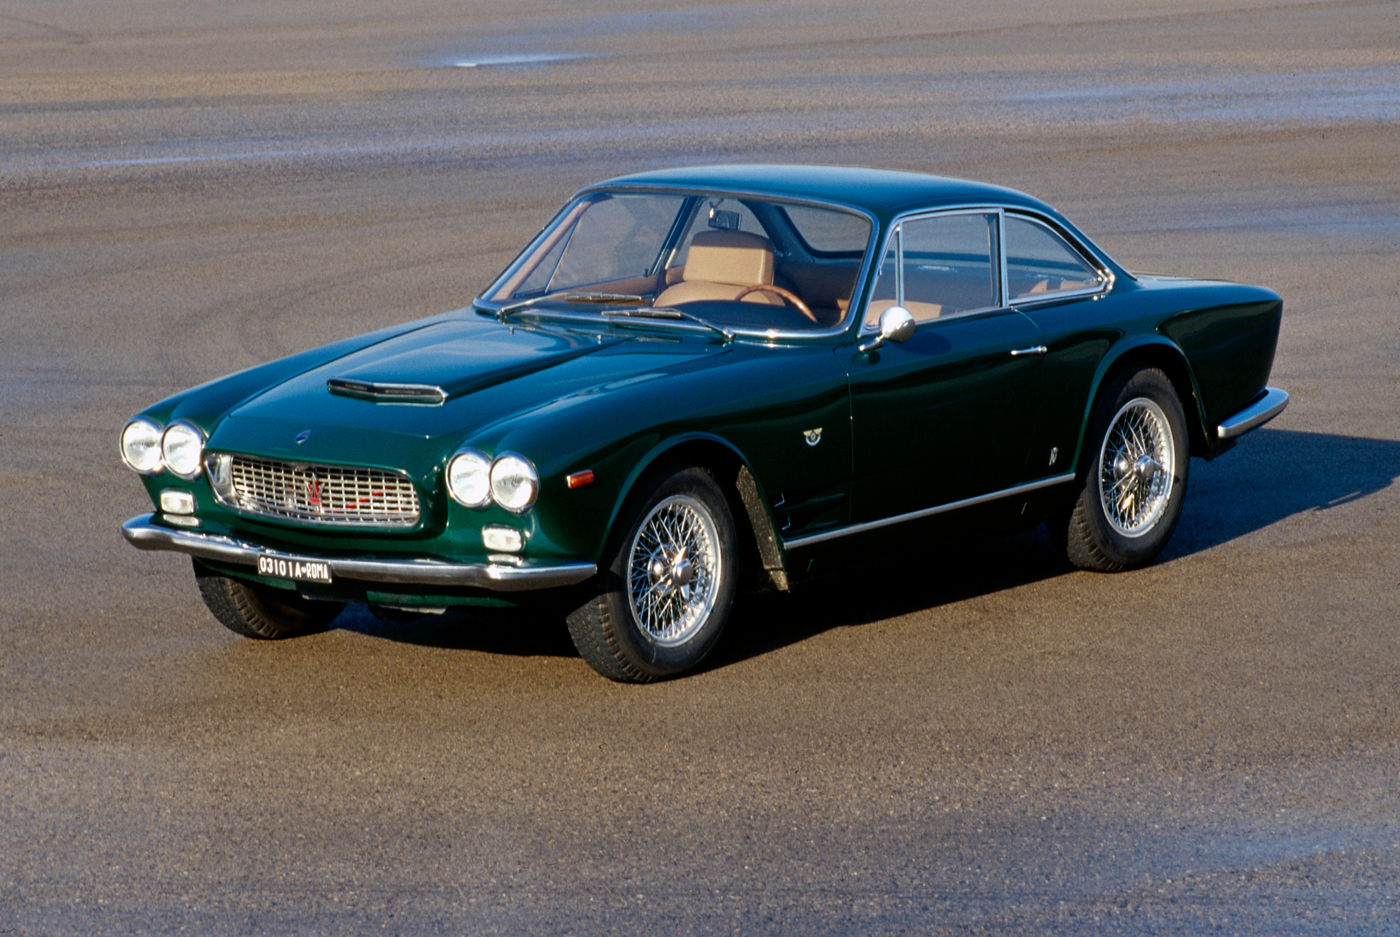 1962 Maserati Sebring - First Series - exterior view of the classic car model